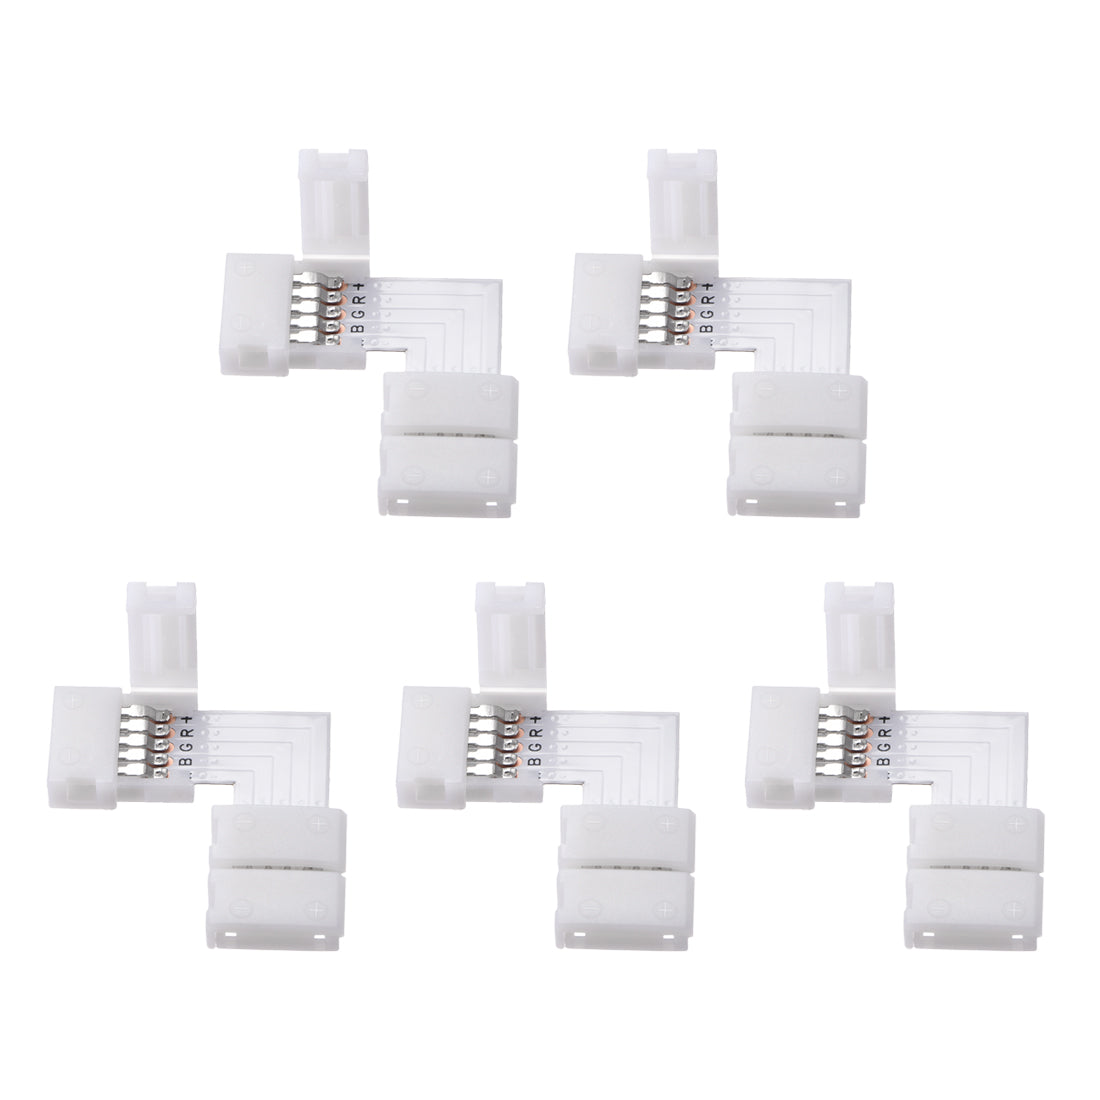 Uxcell Uxcell 10mm 5P L-shape Connector for 5050 3528 RGBW 5 Conductor LED Strip Lights 20Pcs